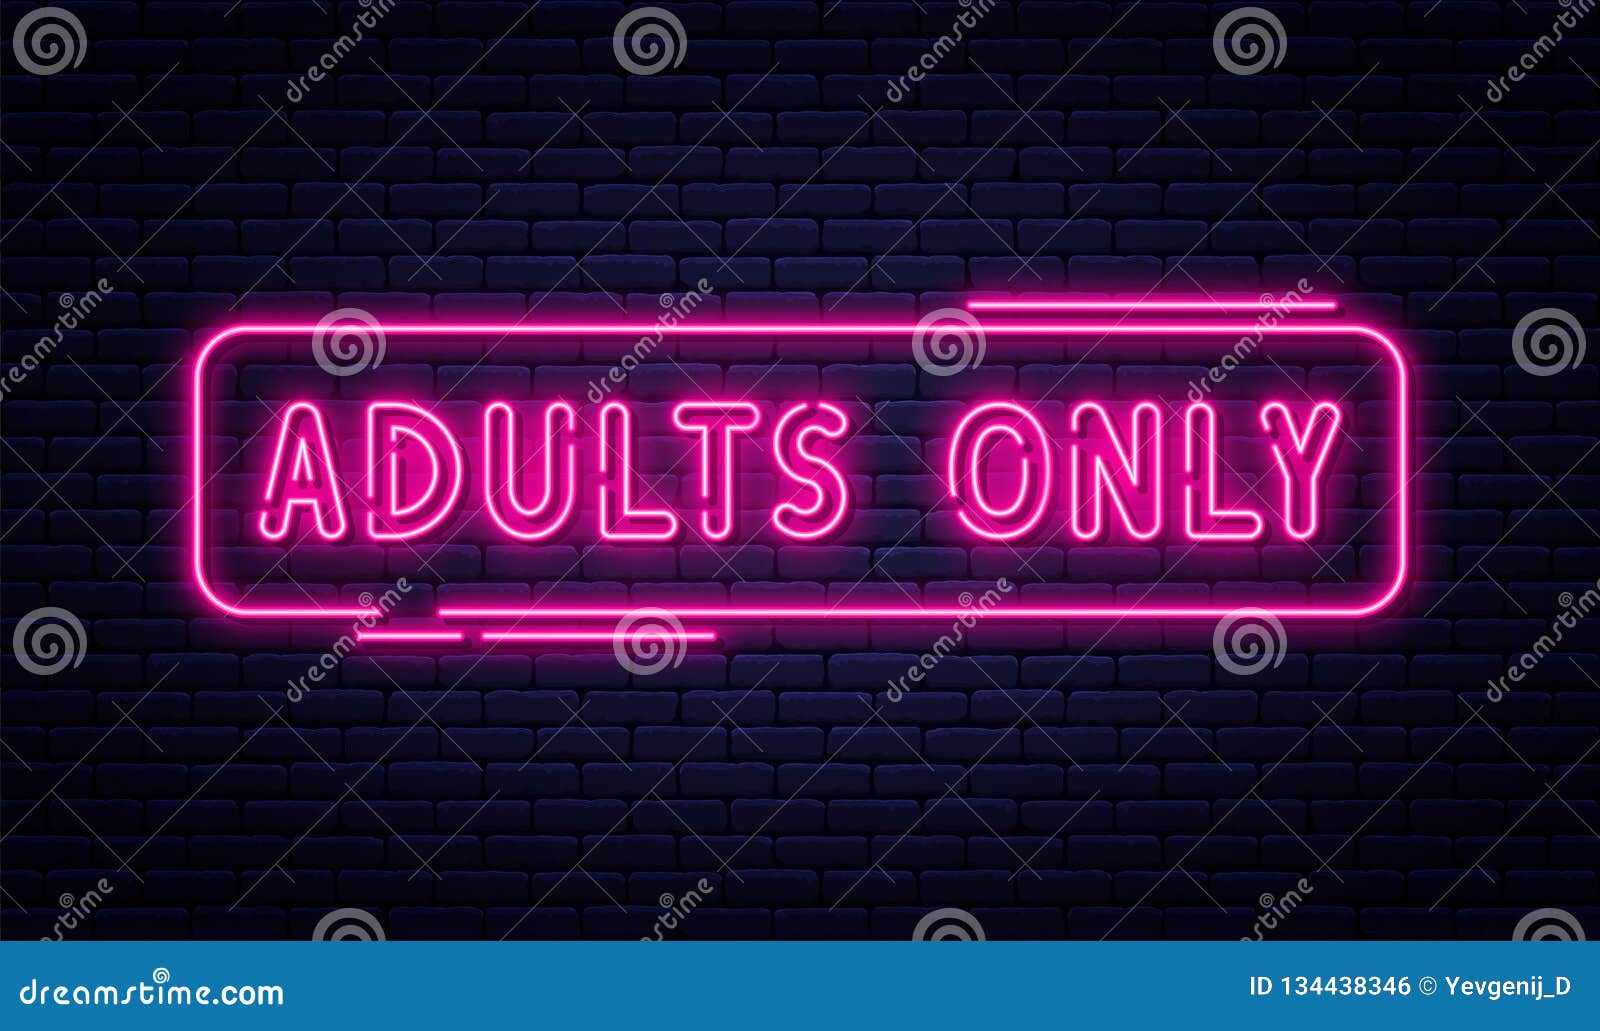 neon sign, adults only, 18 plus, sex and xxx. restricted content, erotic video concept banner, billboard or signboard